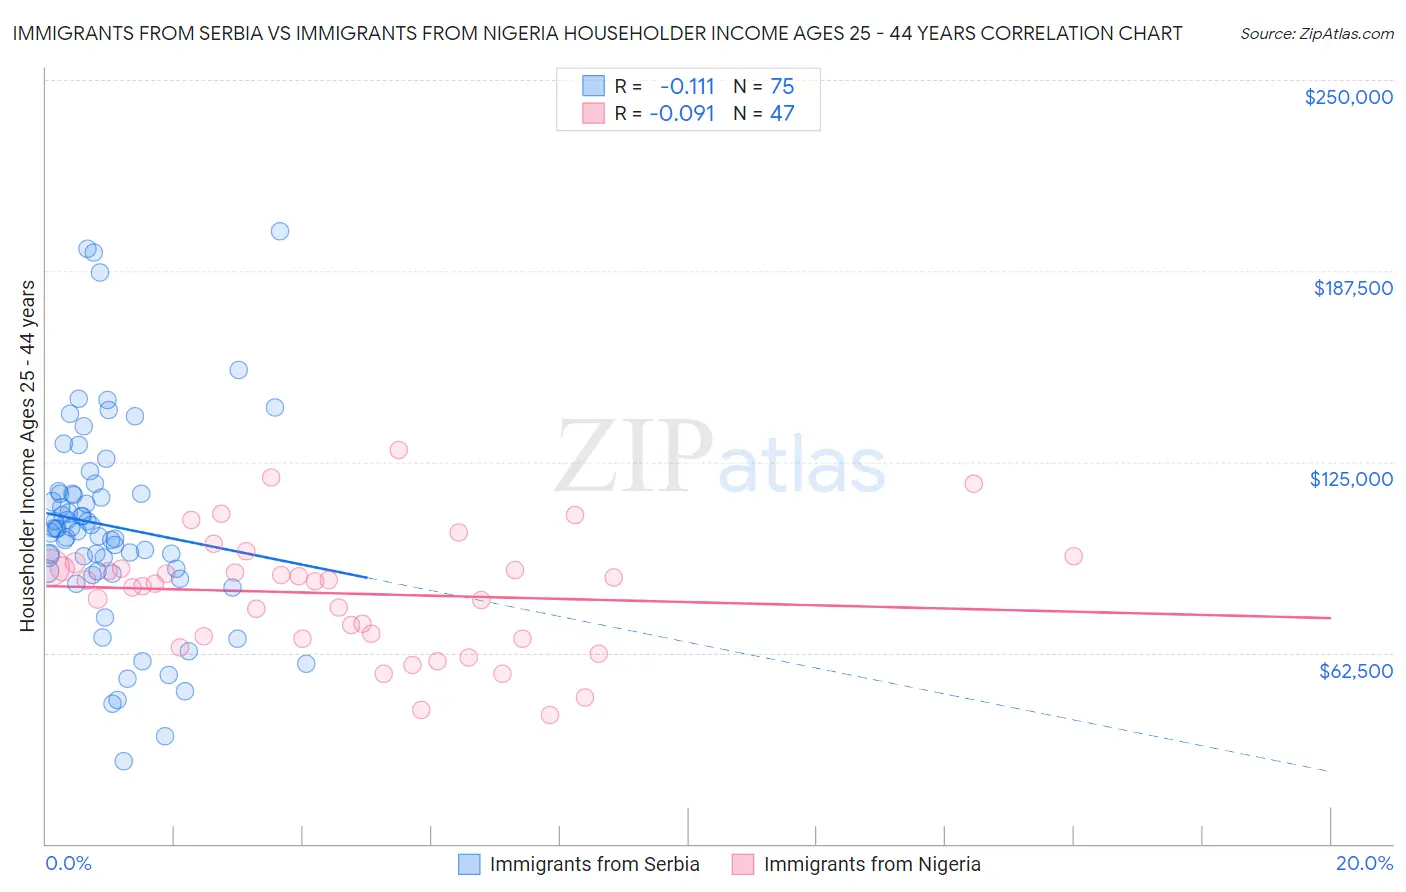 Immigrants from Serbia vs Immigrants from Nigeria Householder Income Ages 25 - 44 years